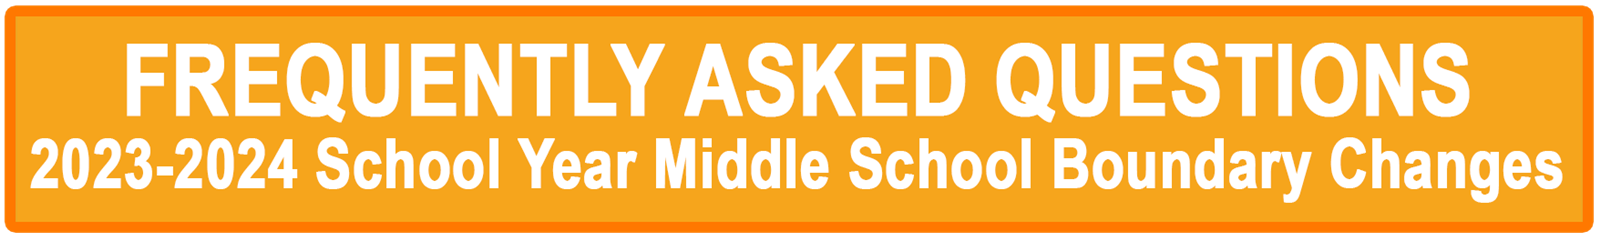 Frequently asked questions. 2032-2024 school yer middle school boundary changes